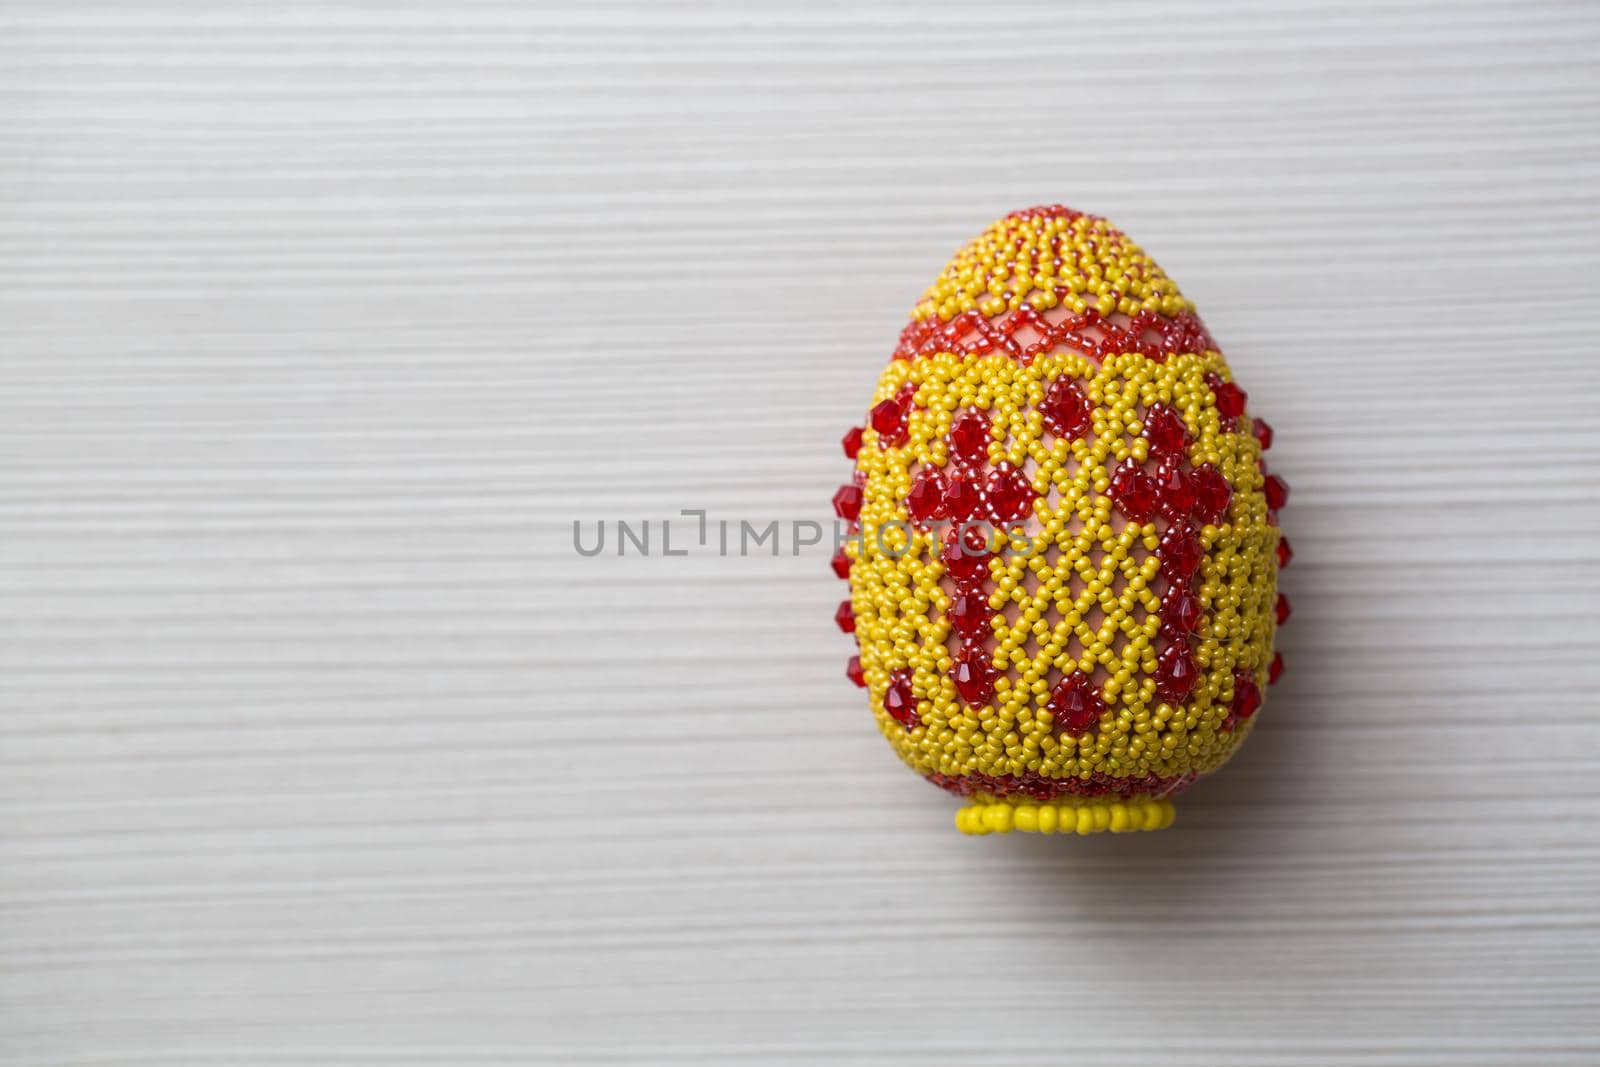 Egg decorated with small beads on a white table